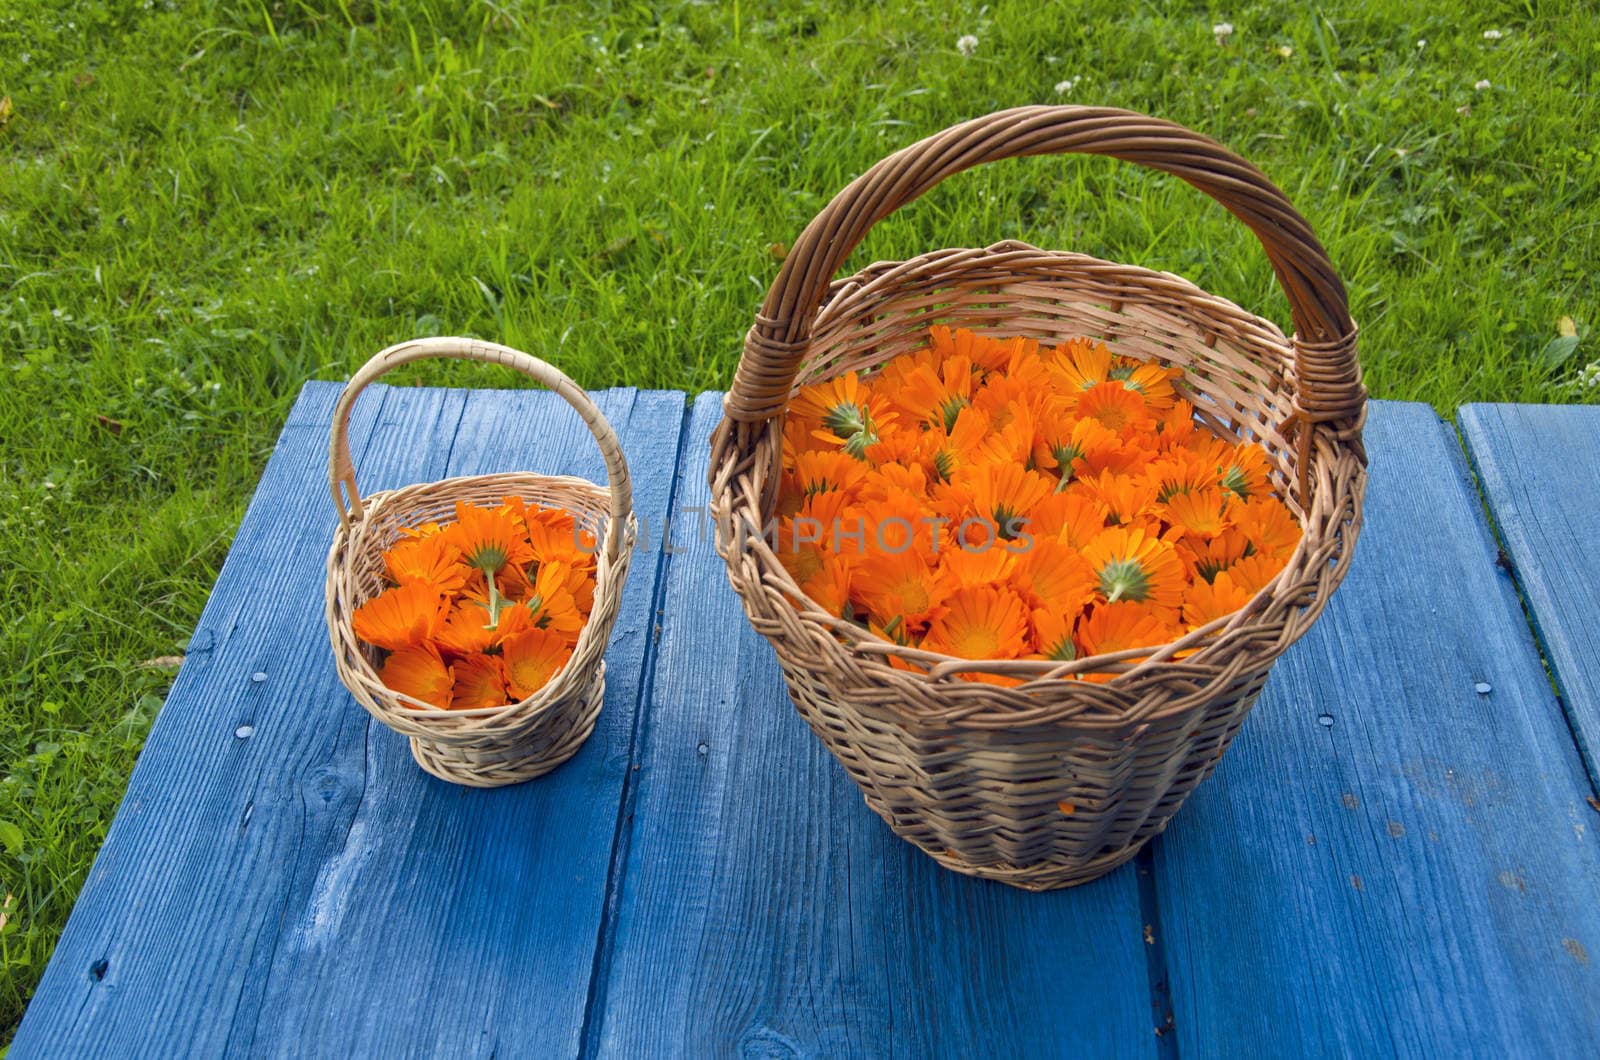 Freshly marigold calendula medical flowers in wicker baskets on blue wooden table